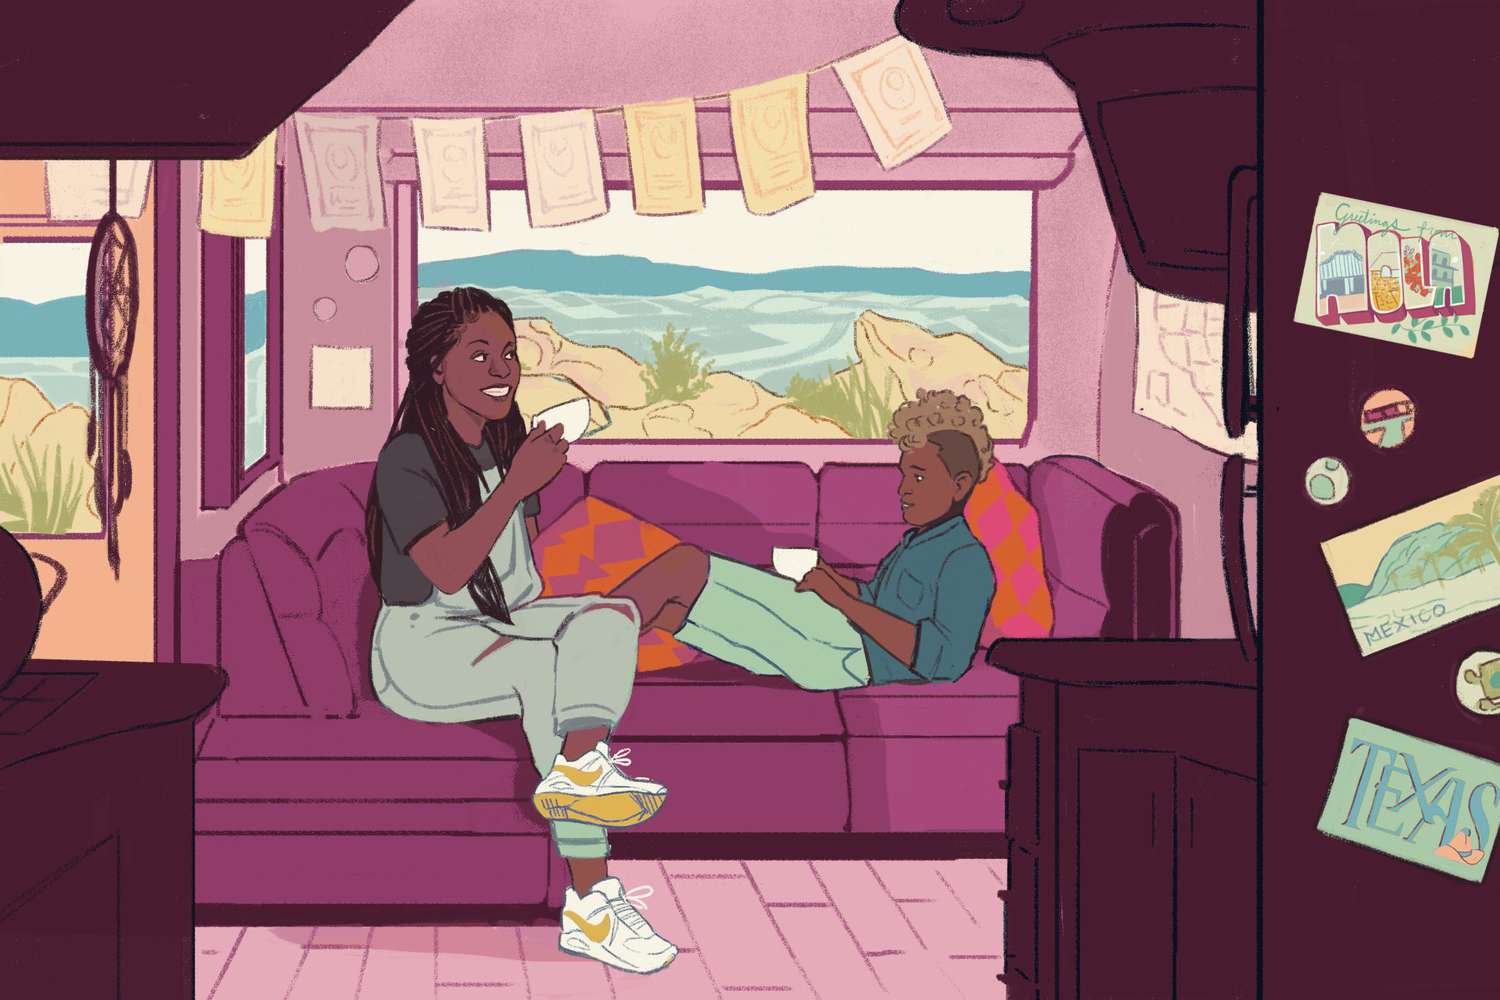 Illustration of mom and teenage son in a RV with a view of a mountain landscape